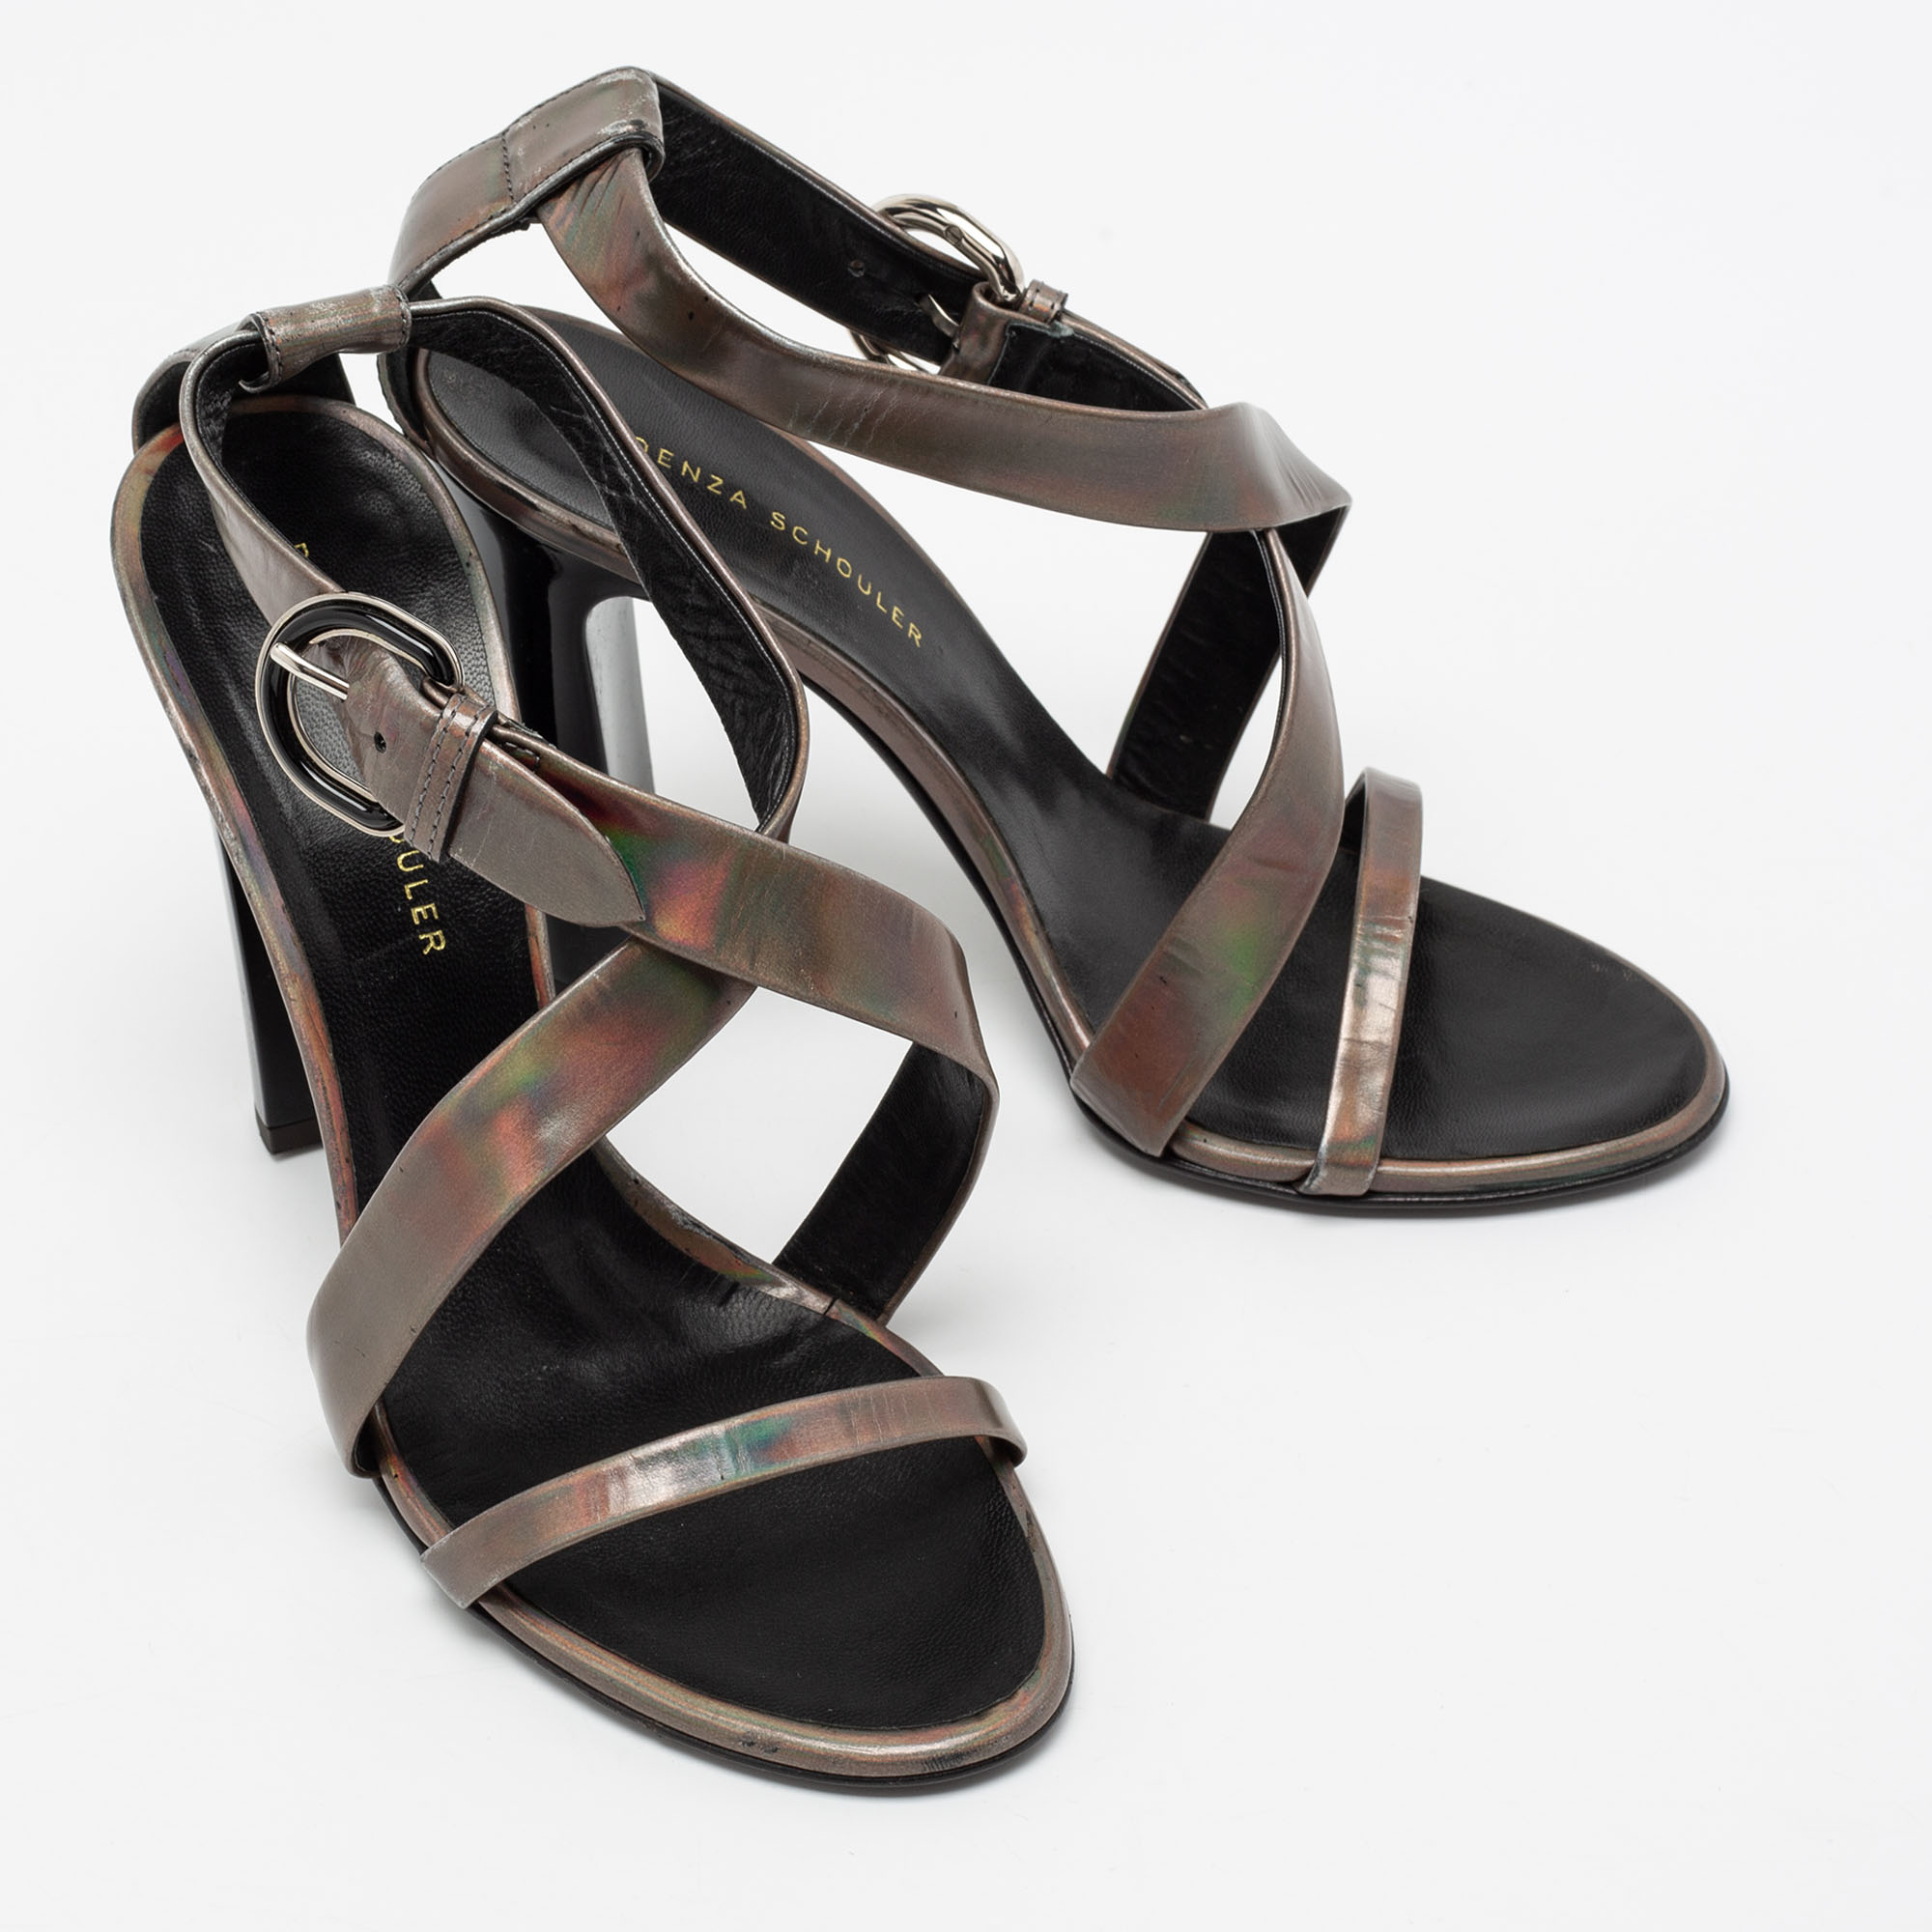 Proenza Schouler Metallic Patent Leather Iridescent Strappy Sandals Size 37.5